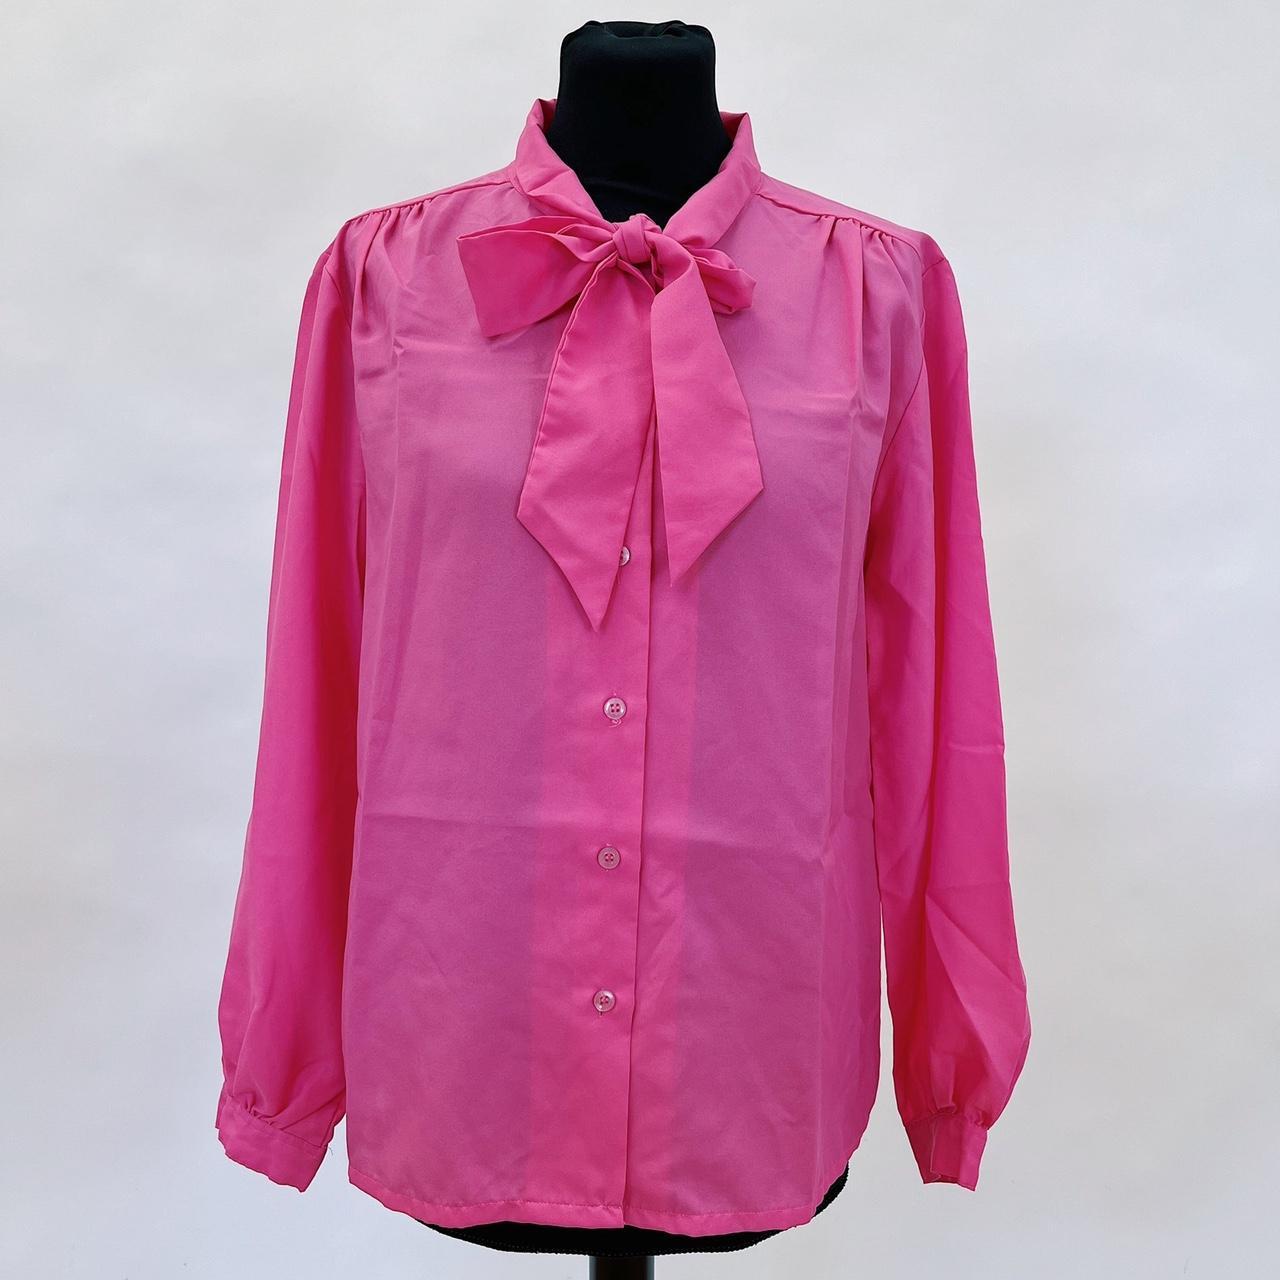 Vintage 80s pink pussy bow blouse size S 39” bust - Depop